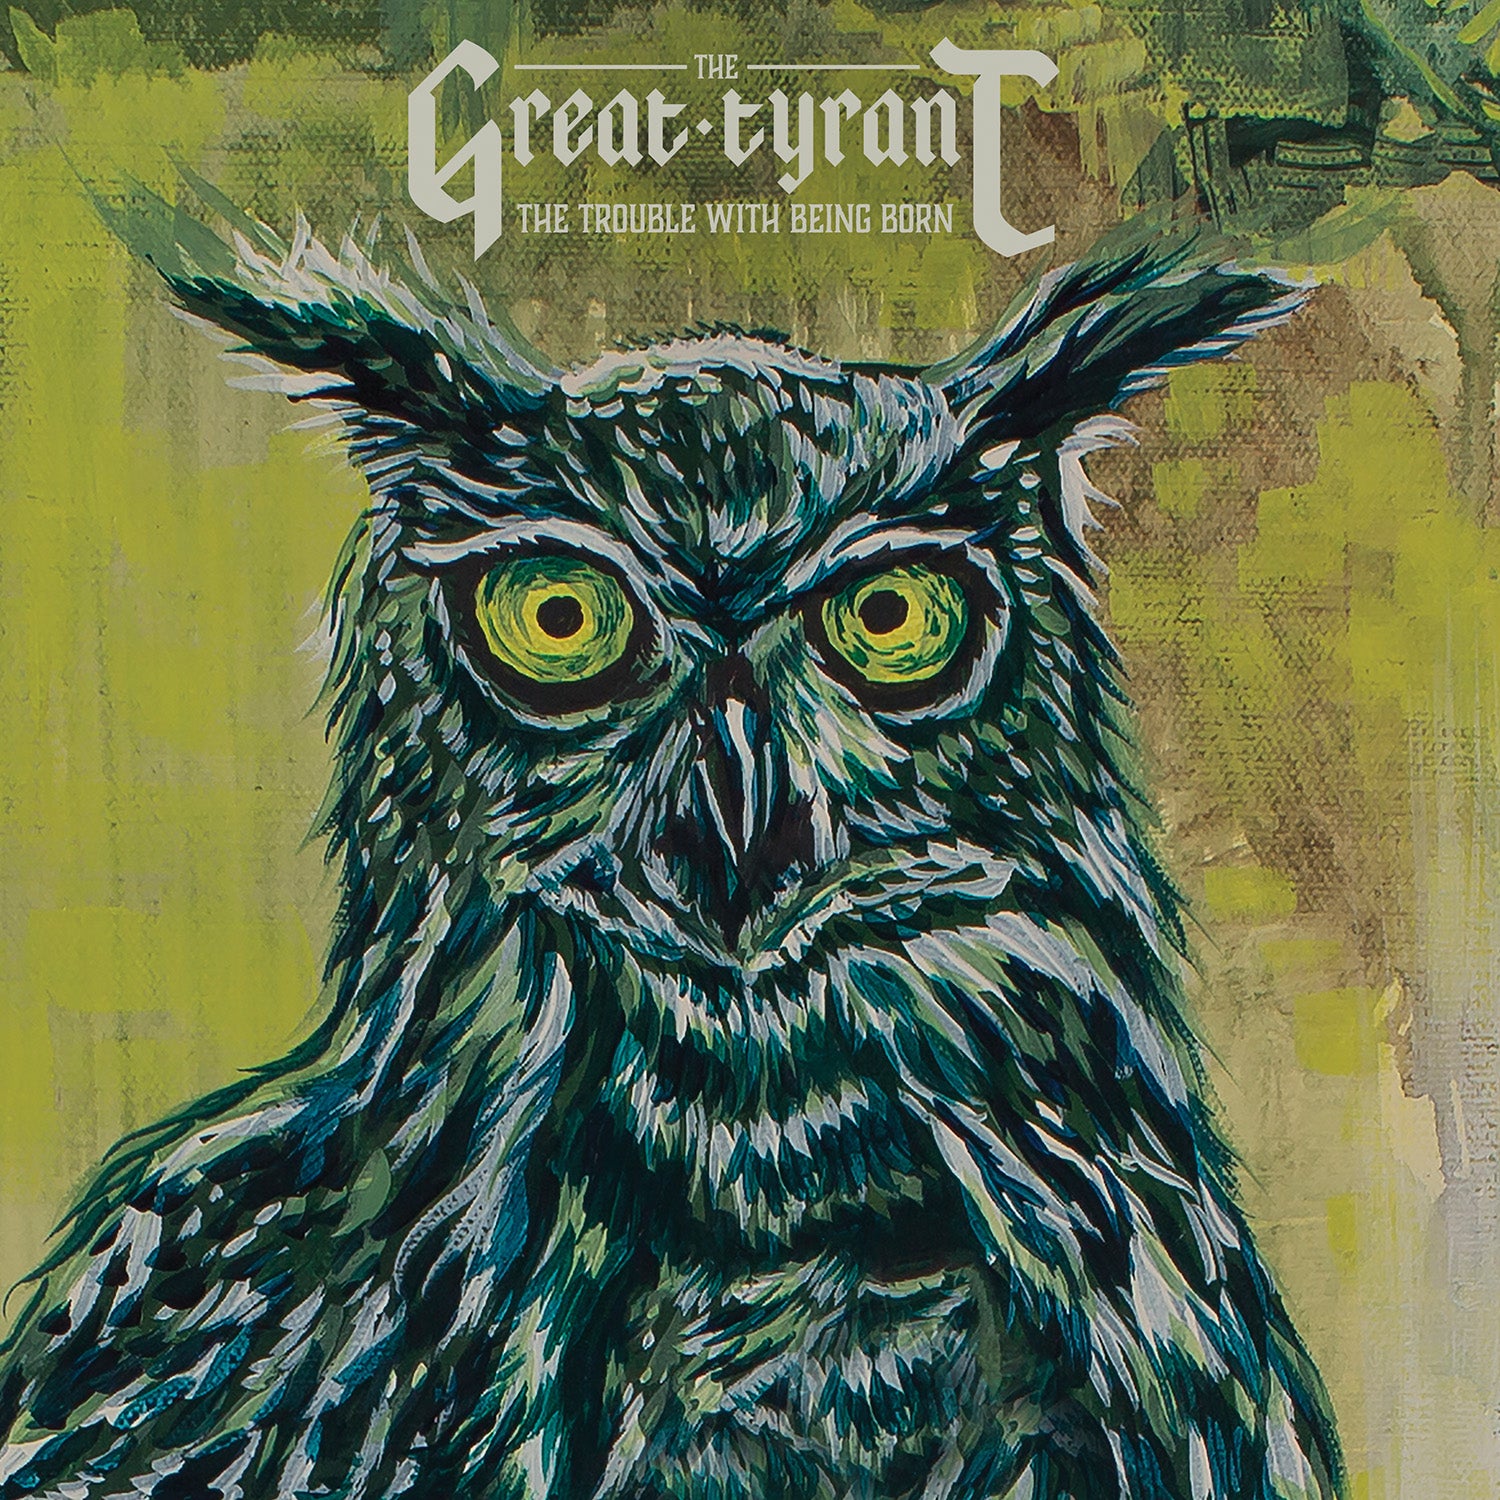 The Great Tyrant "The Trouble With Being Born" CD